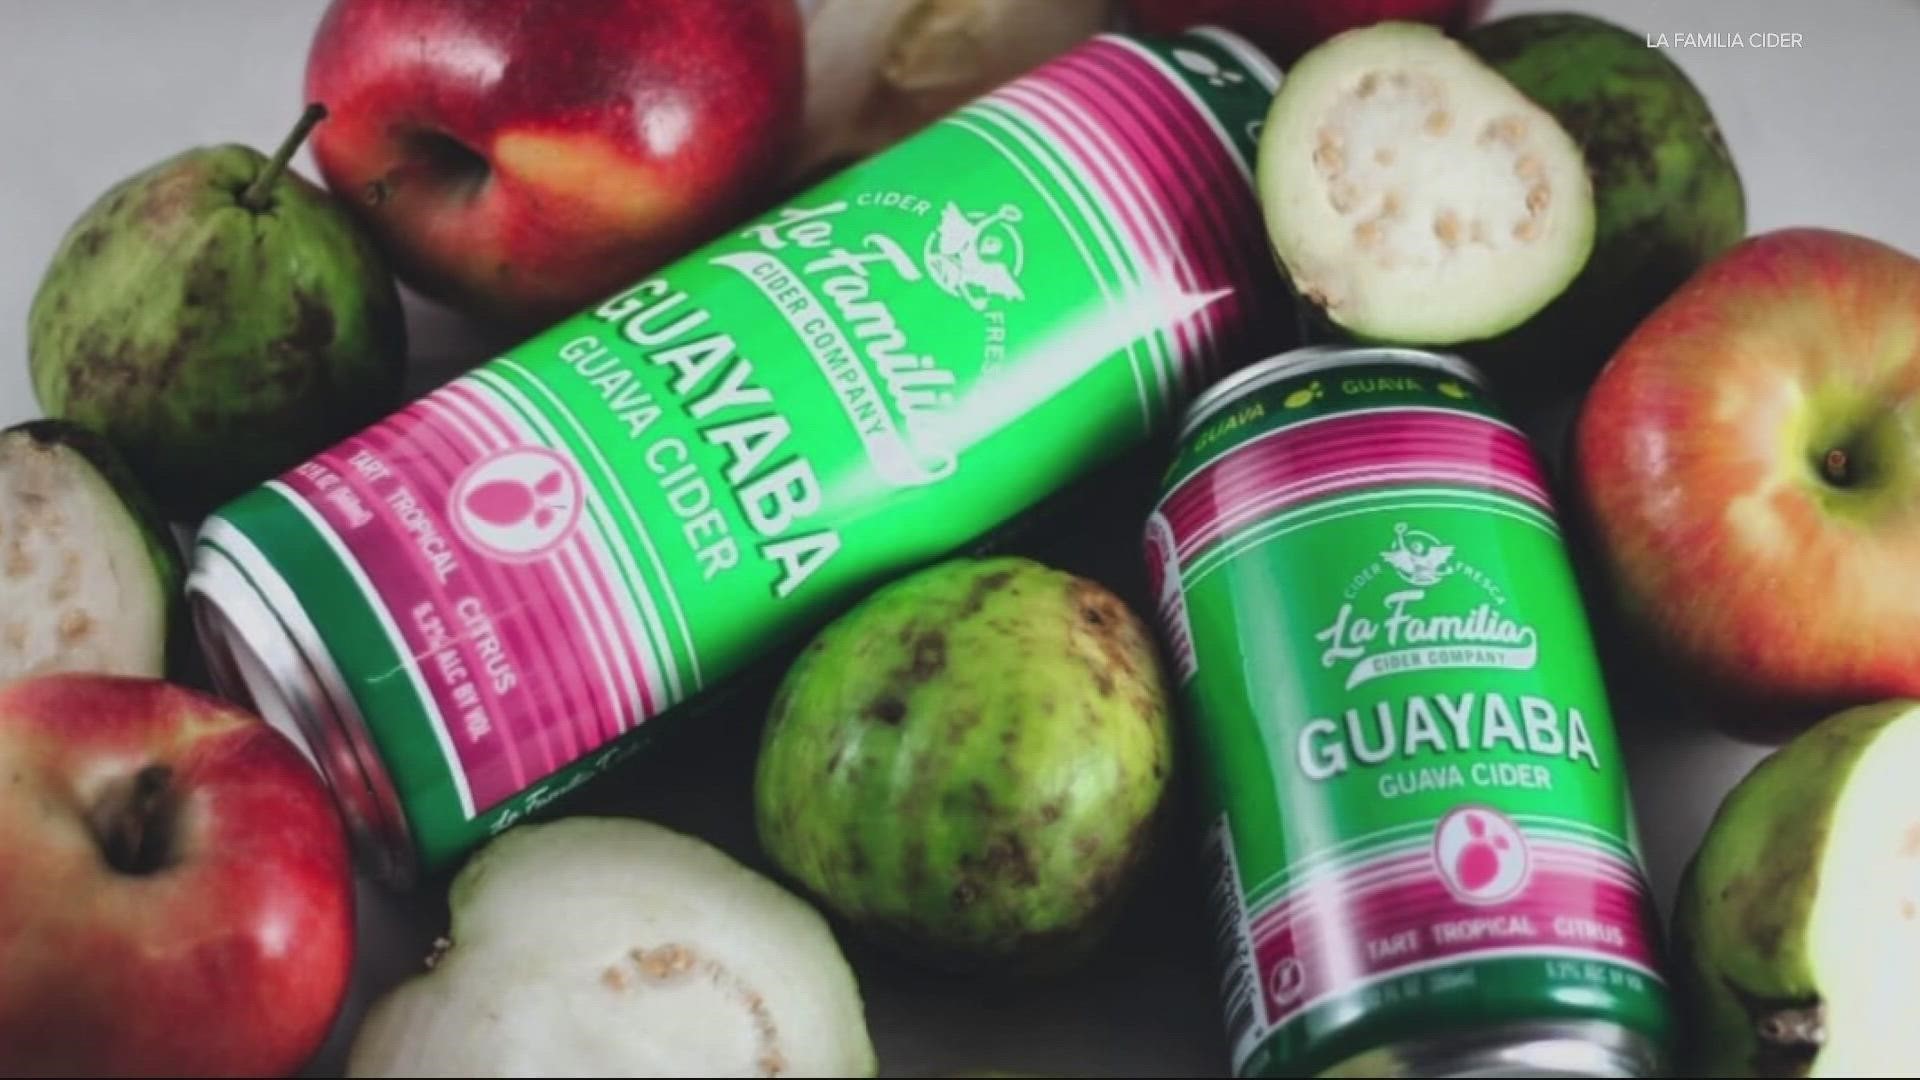 La Familia Cider was founded in 2017 by the Gonzalez family, first-generation Mexican immigrants.